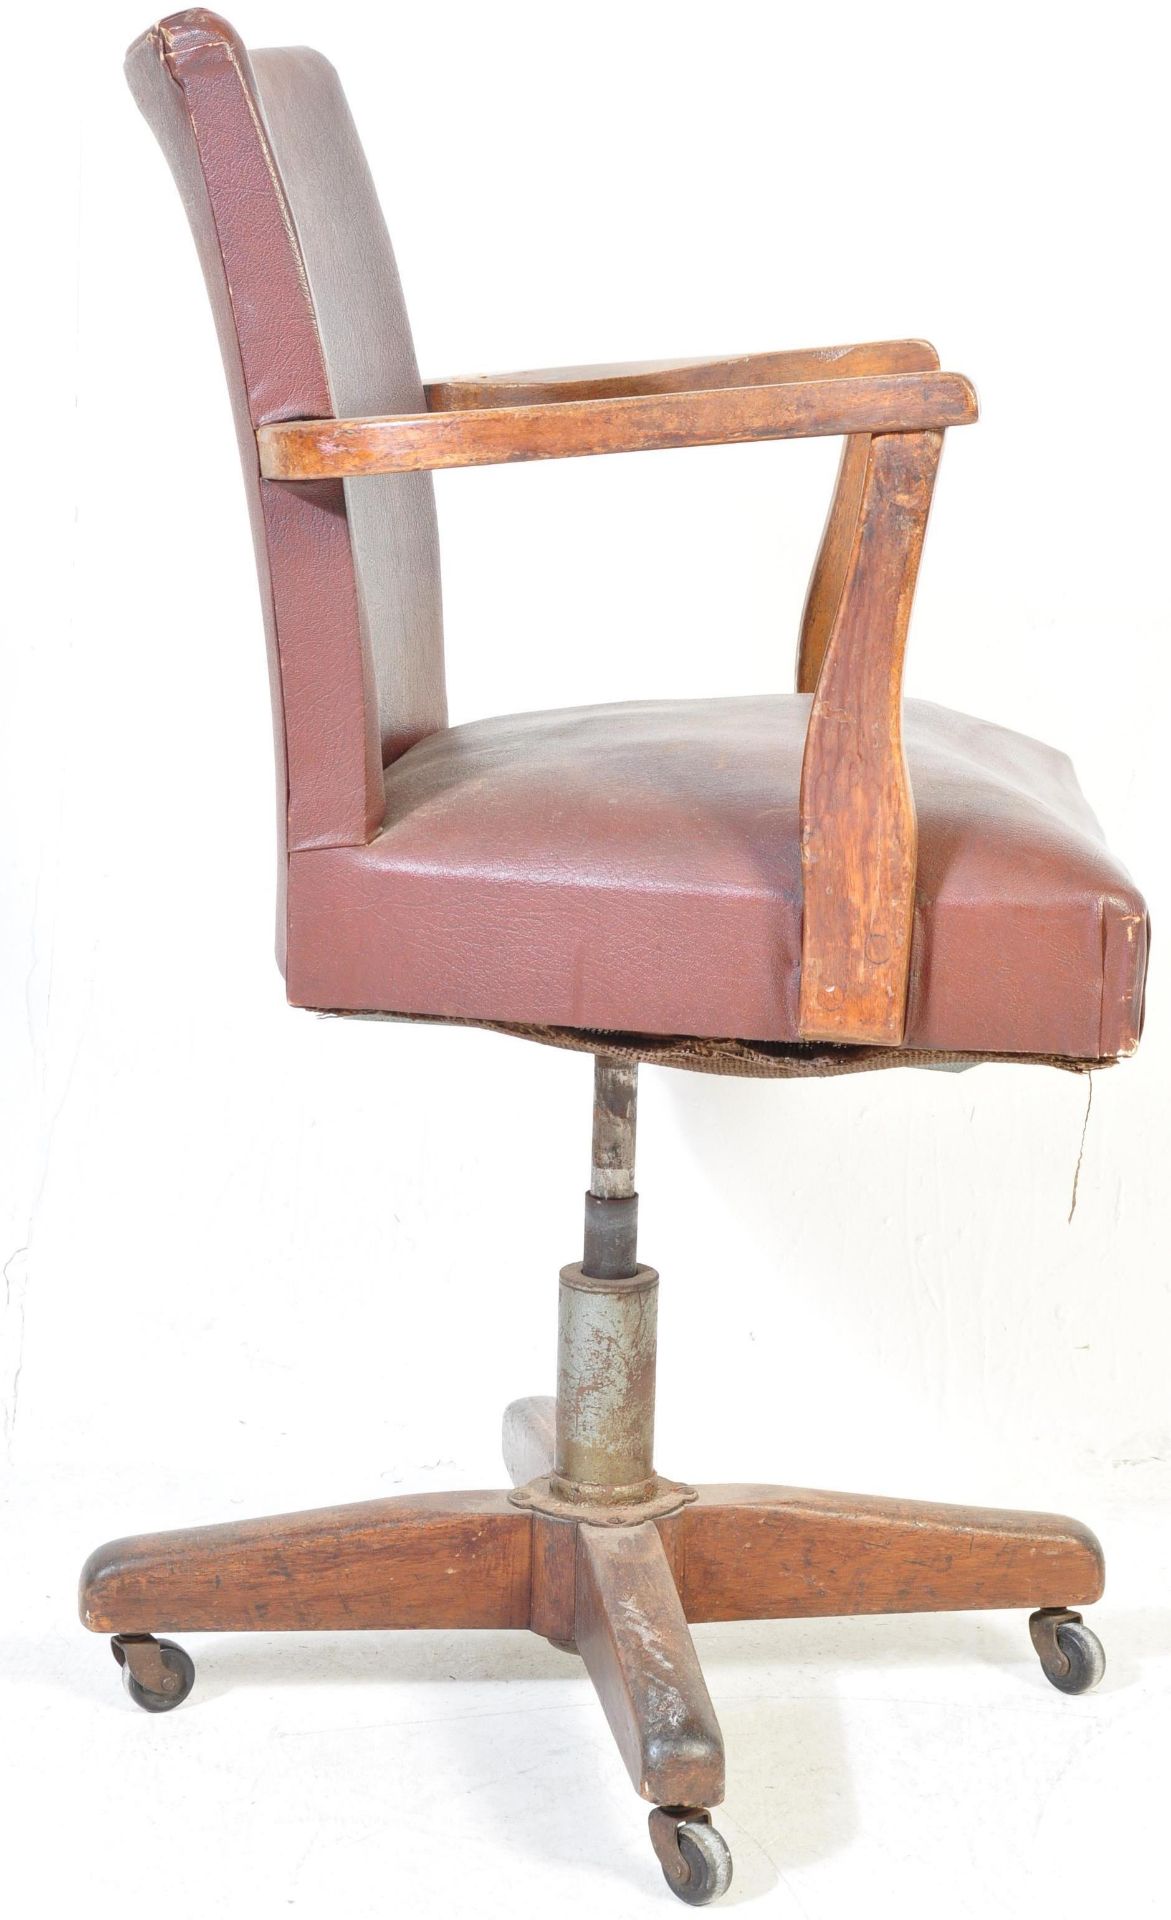 EARLY 20TH CENTURY HILLCREST MANNER SWIVEL CHAIR - Image 3 of 4